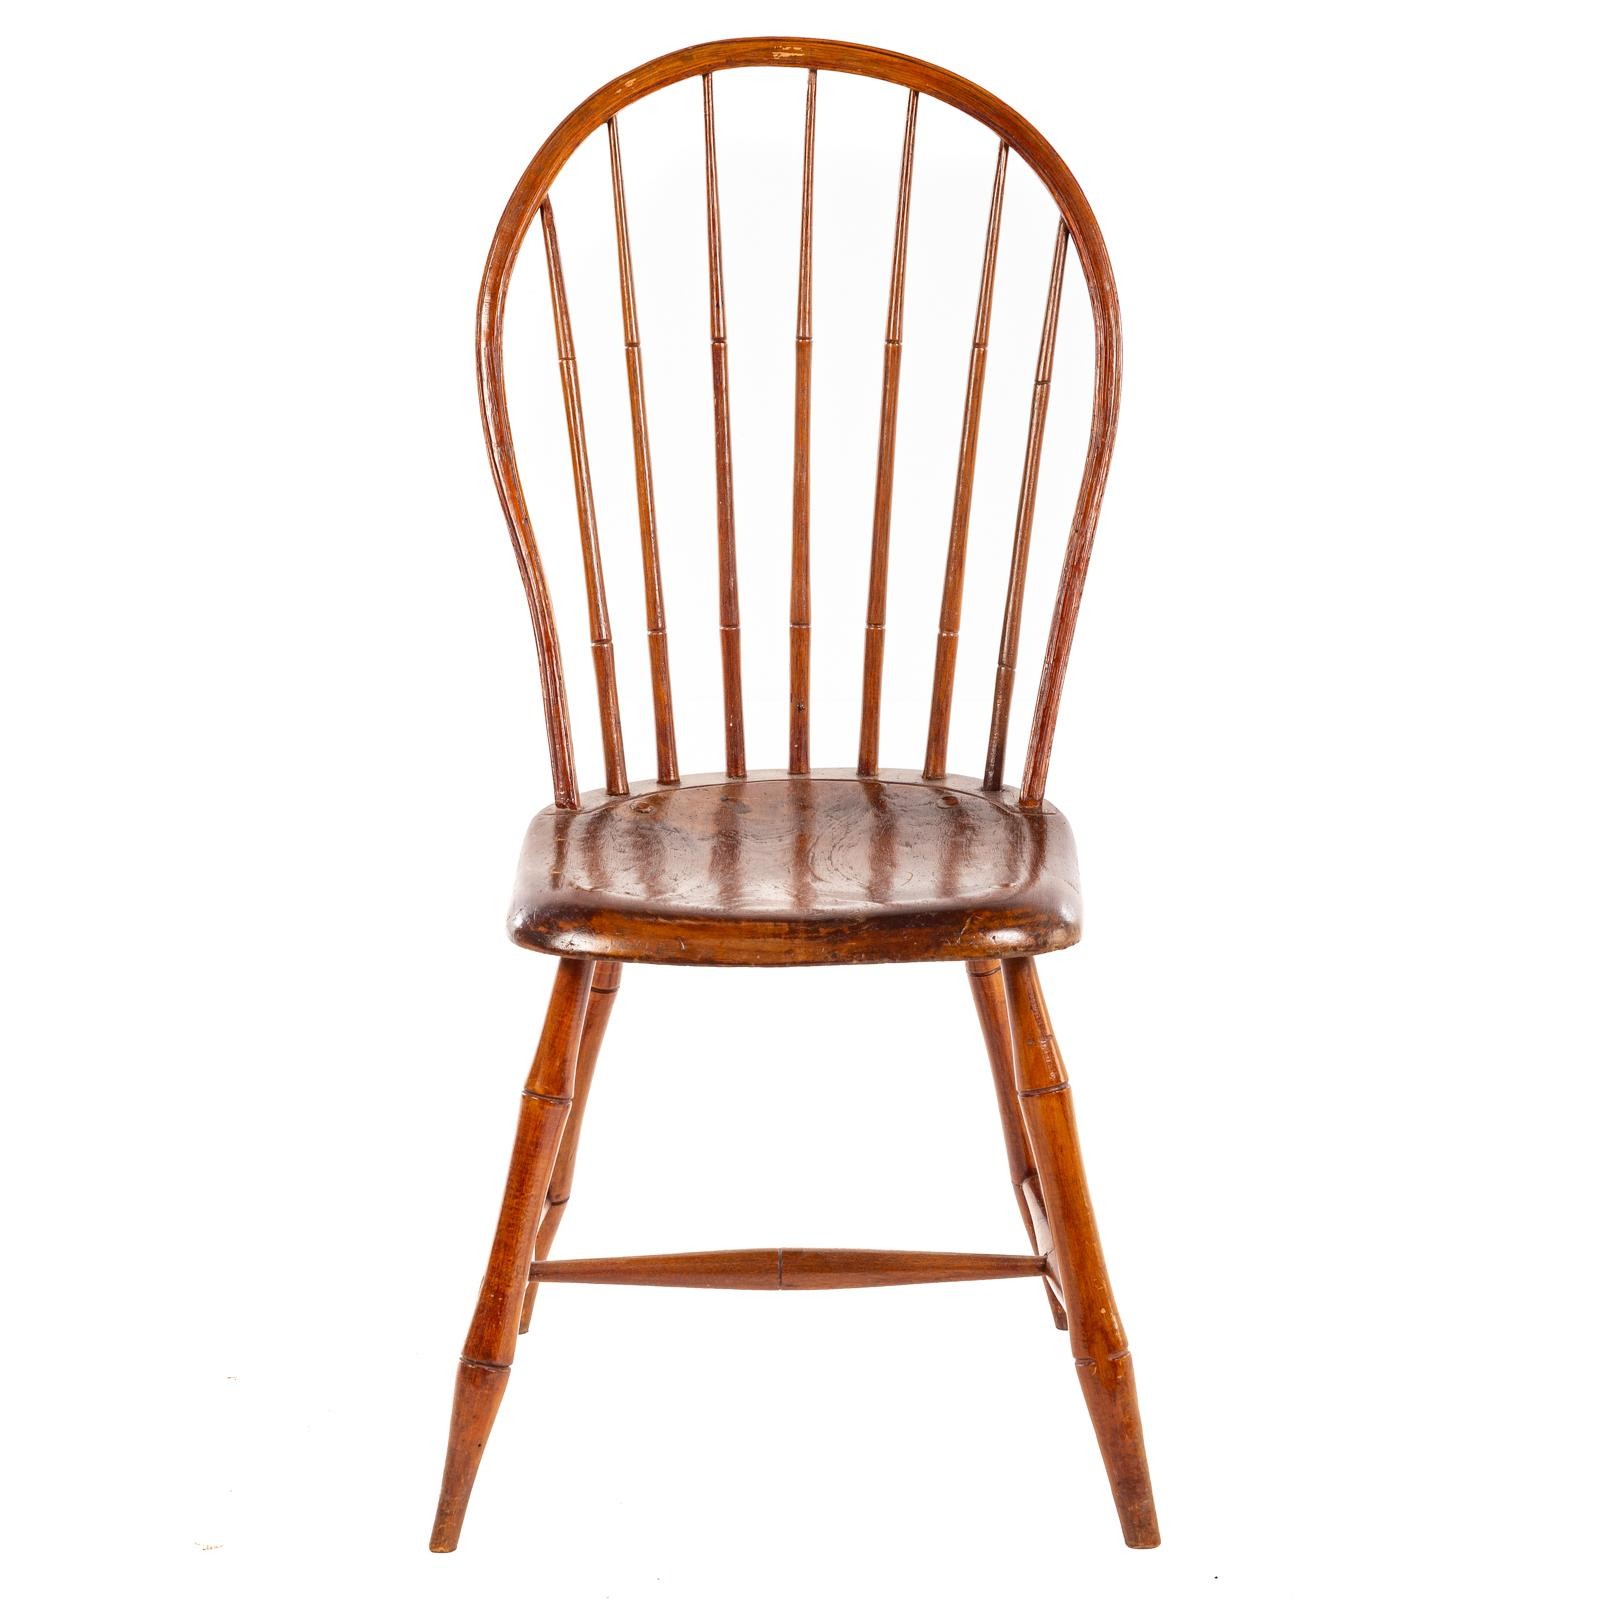 AMERICAN WINDSOR CHAIR HISTORICAL 3cadf7